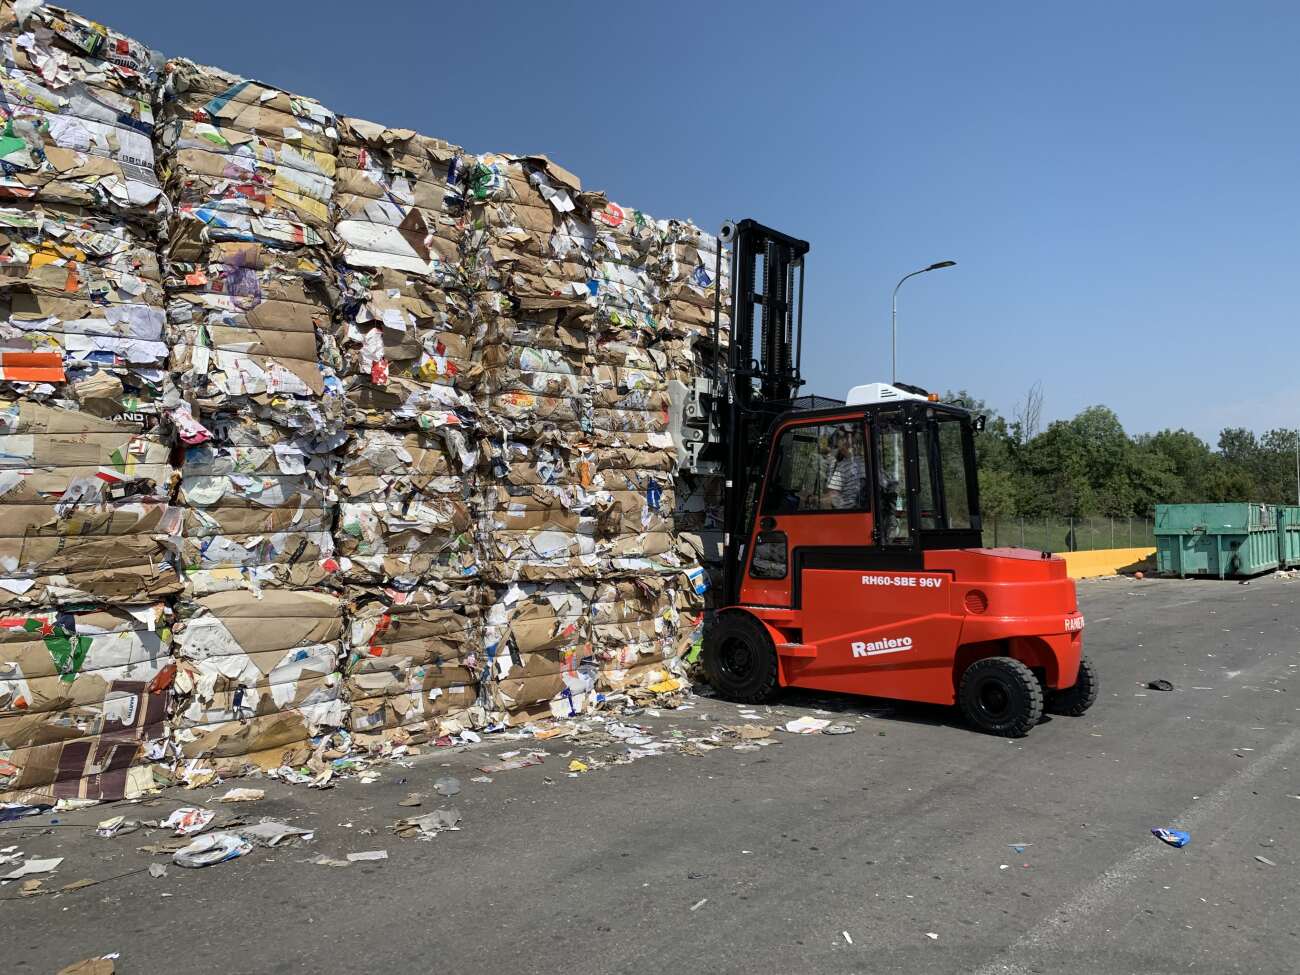 The new RH forklift configuration for the recycling sector